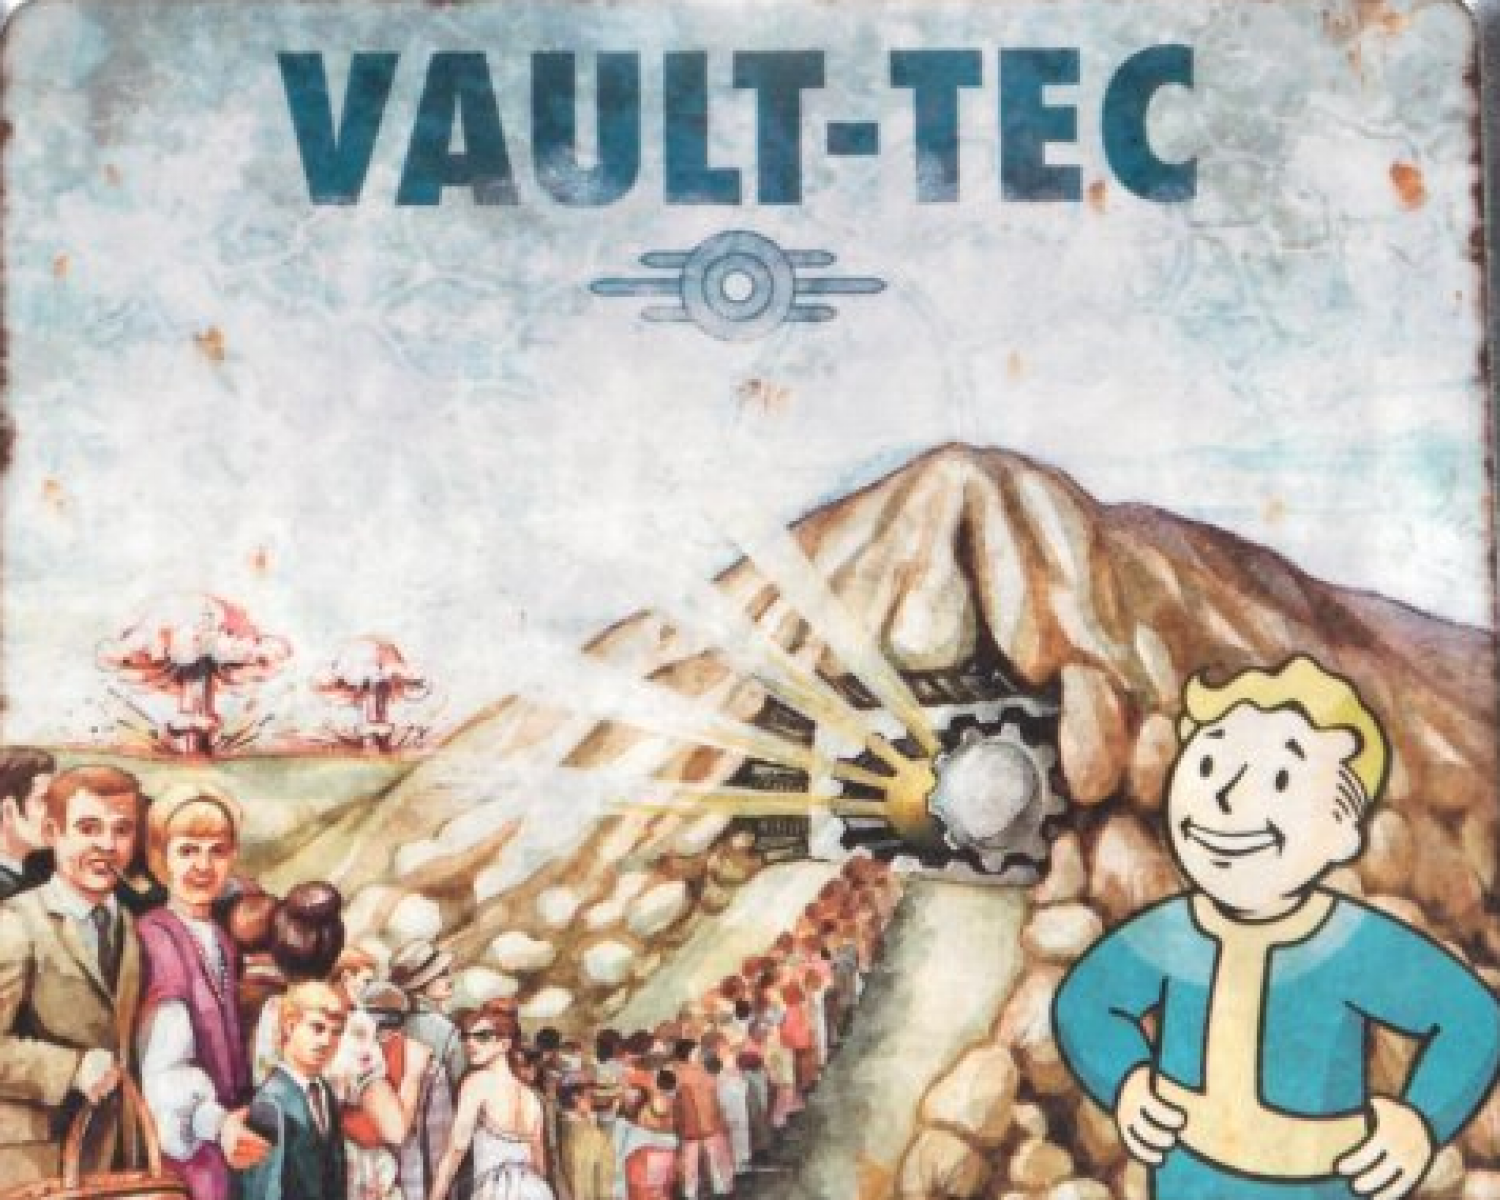 Get Educated With Vault Tec   The GCE